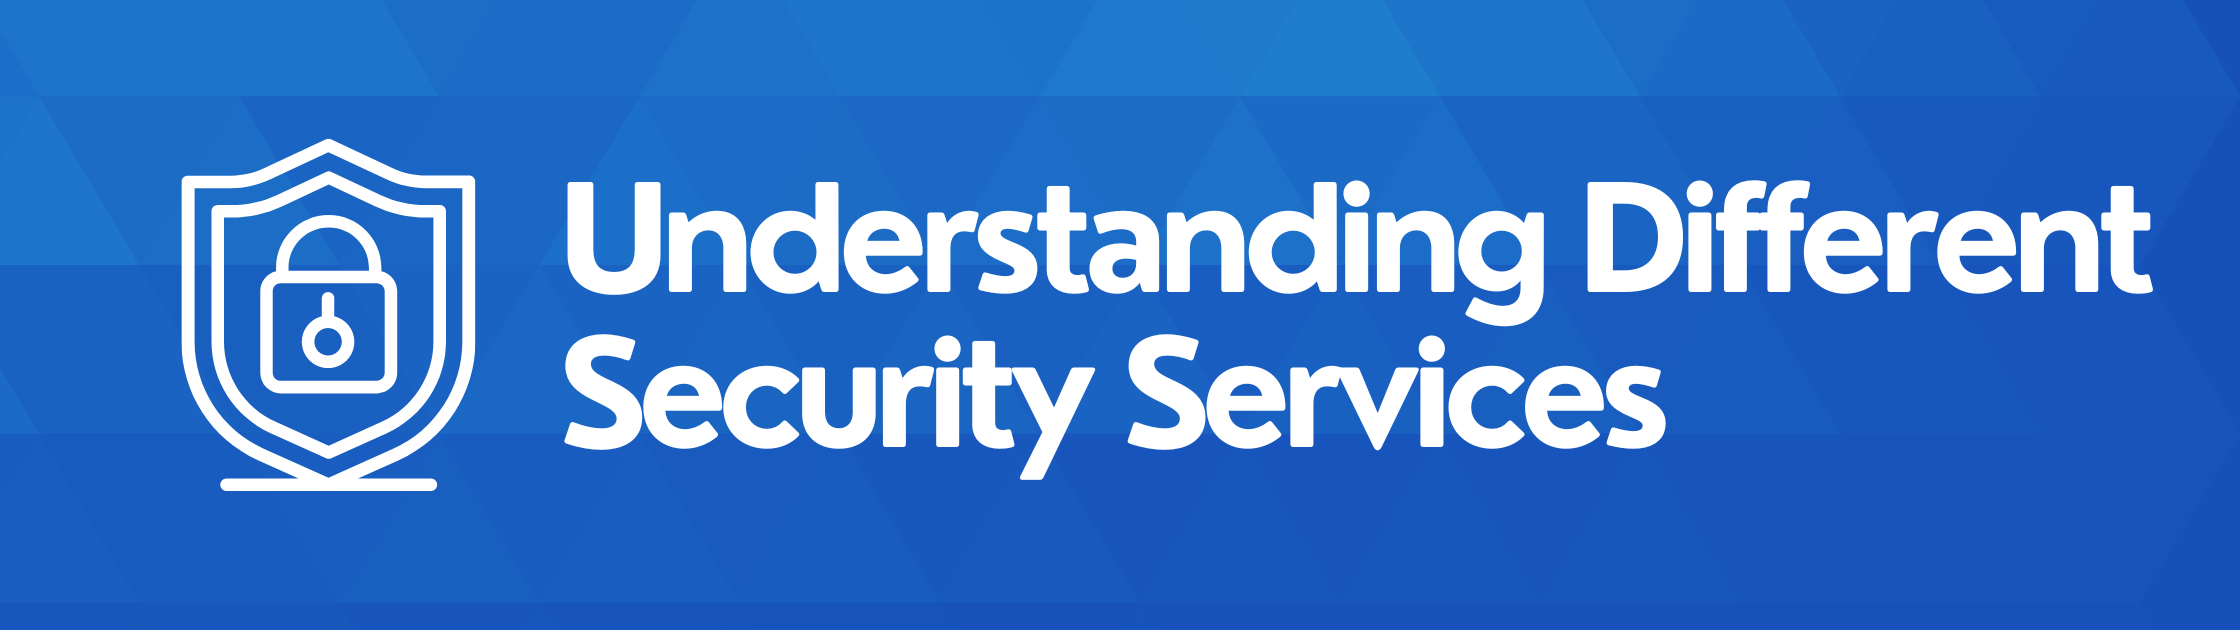 Different Security Services